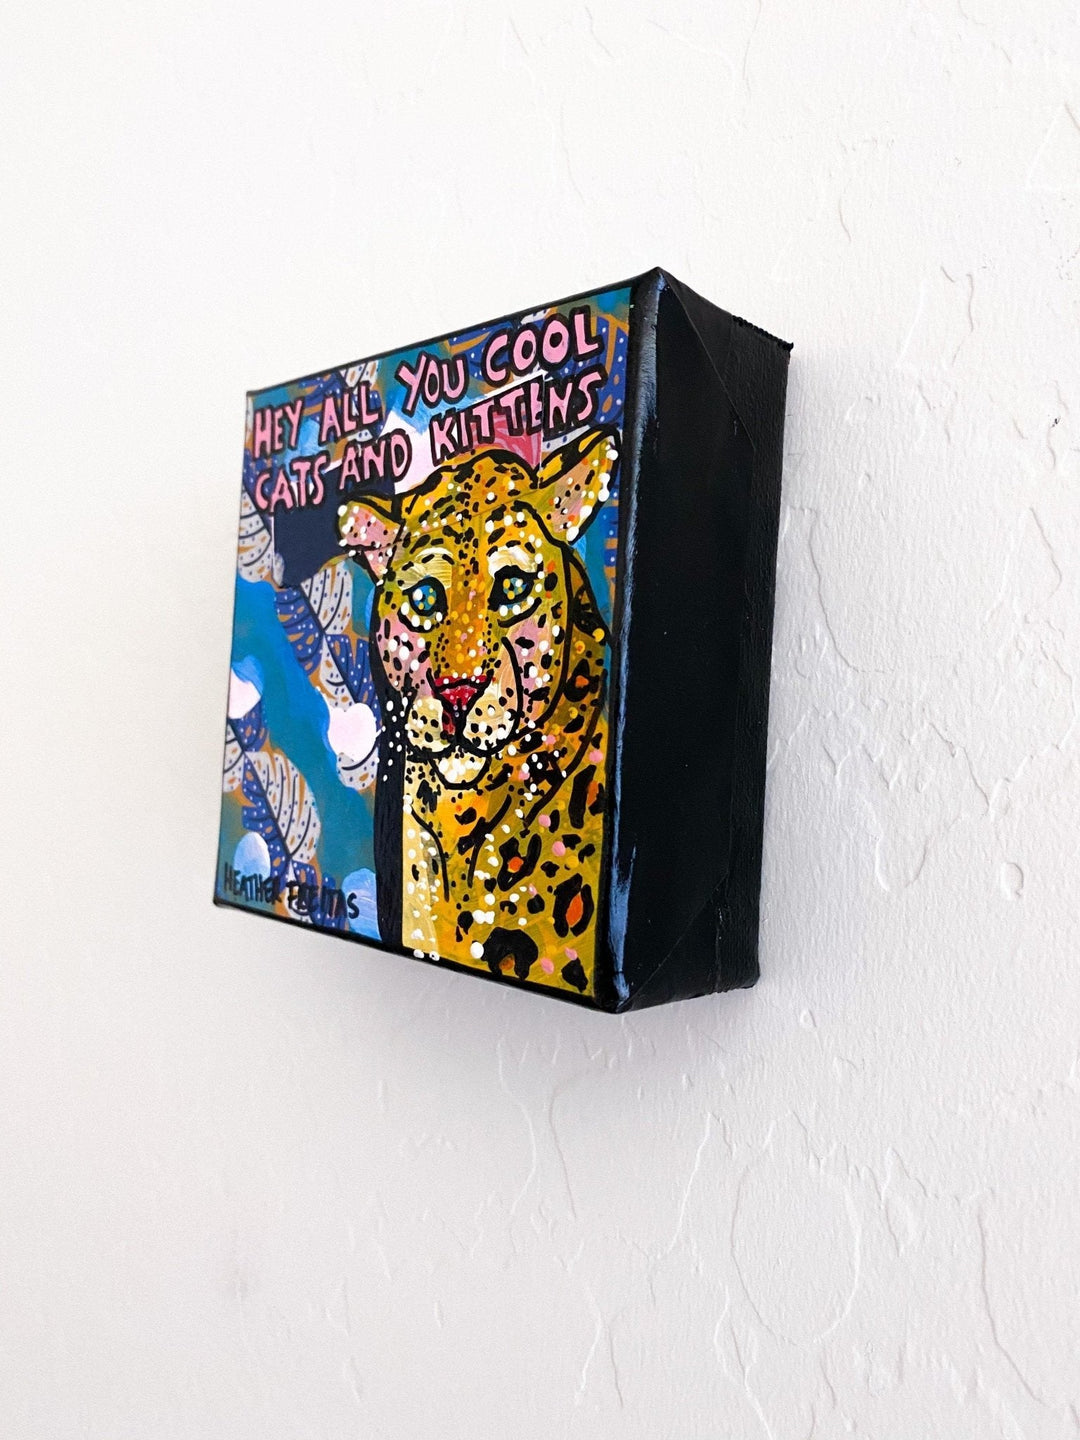 Hey All You Cool Cats And Kittens - Jaguar Edition - Heather Freitas - fine art home deccor